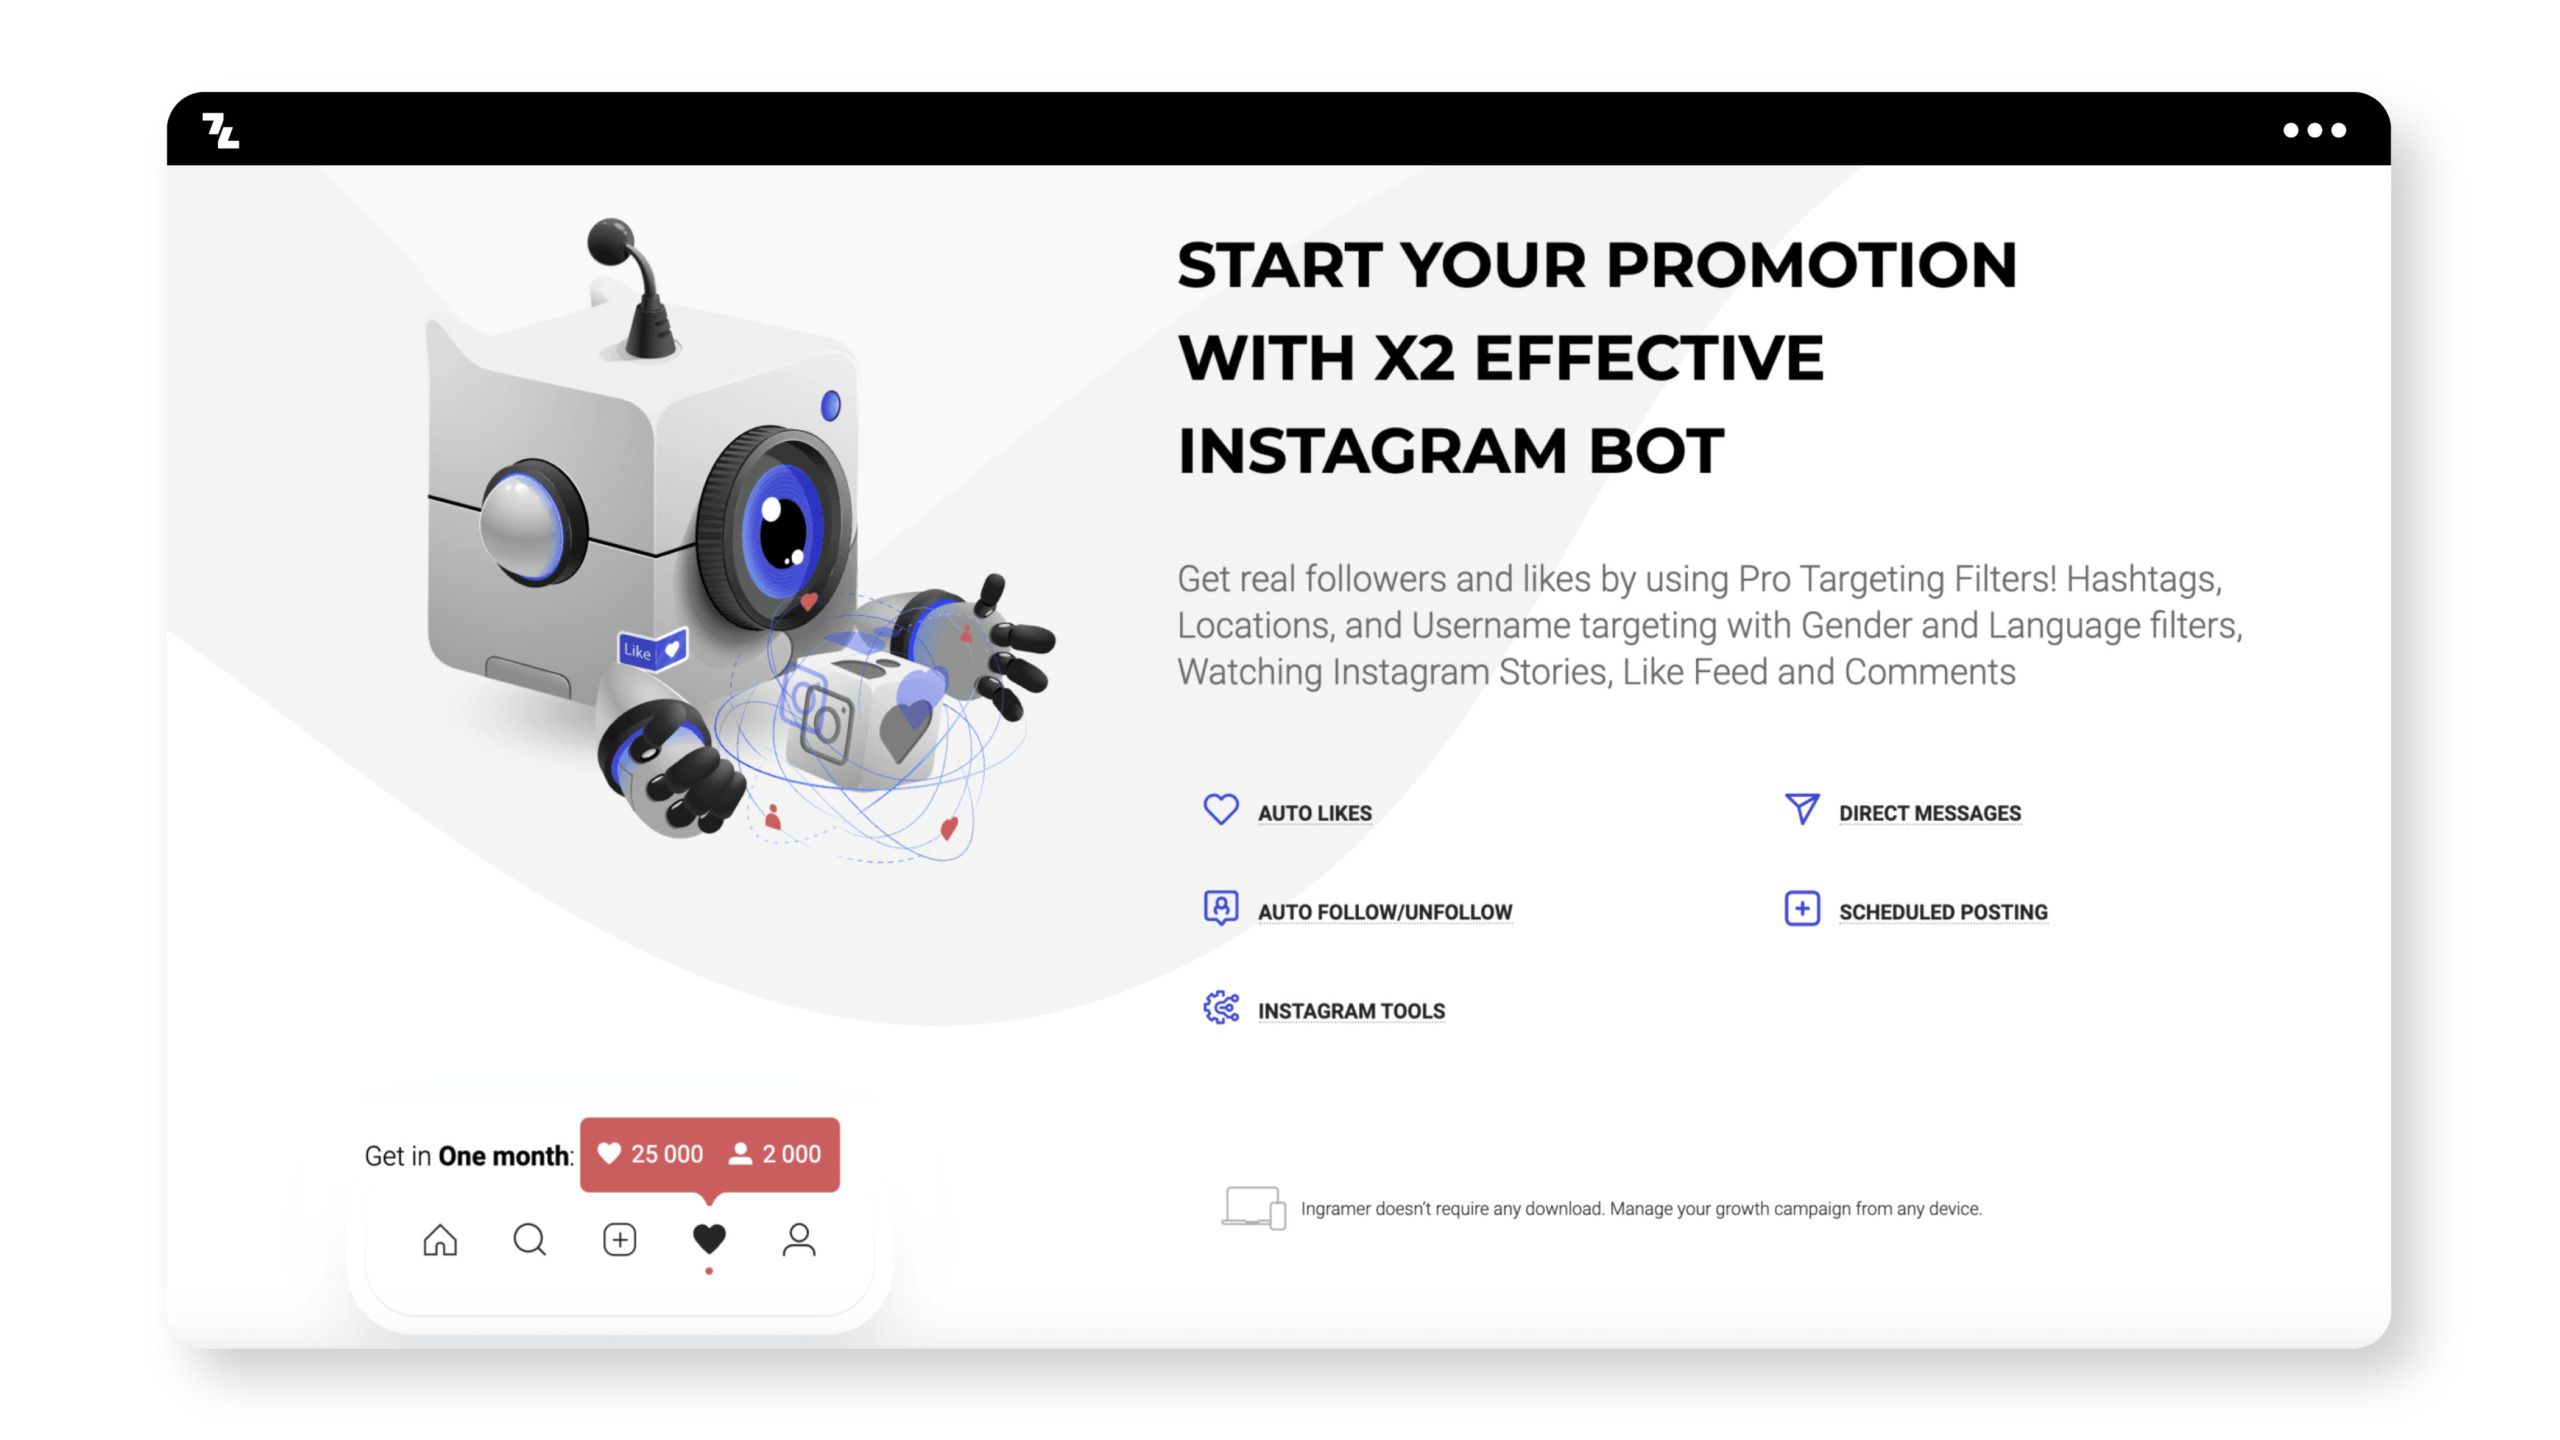 Start your promotion with the top Instagram bot for effective likes and follows.